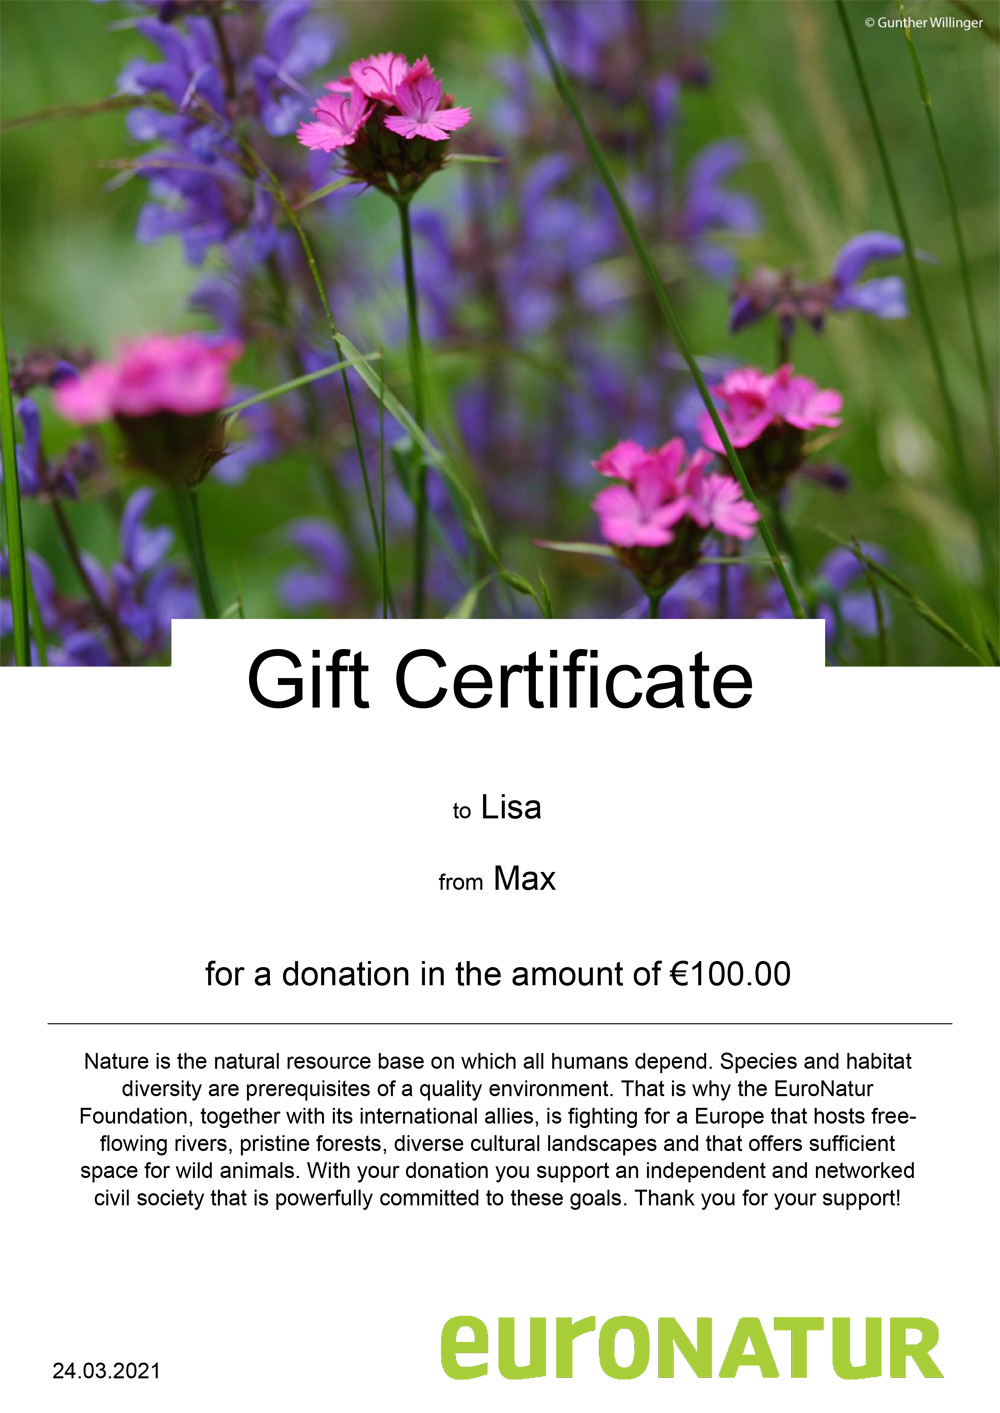 Certificate for a gift donation - EuroNatur